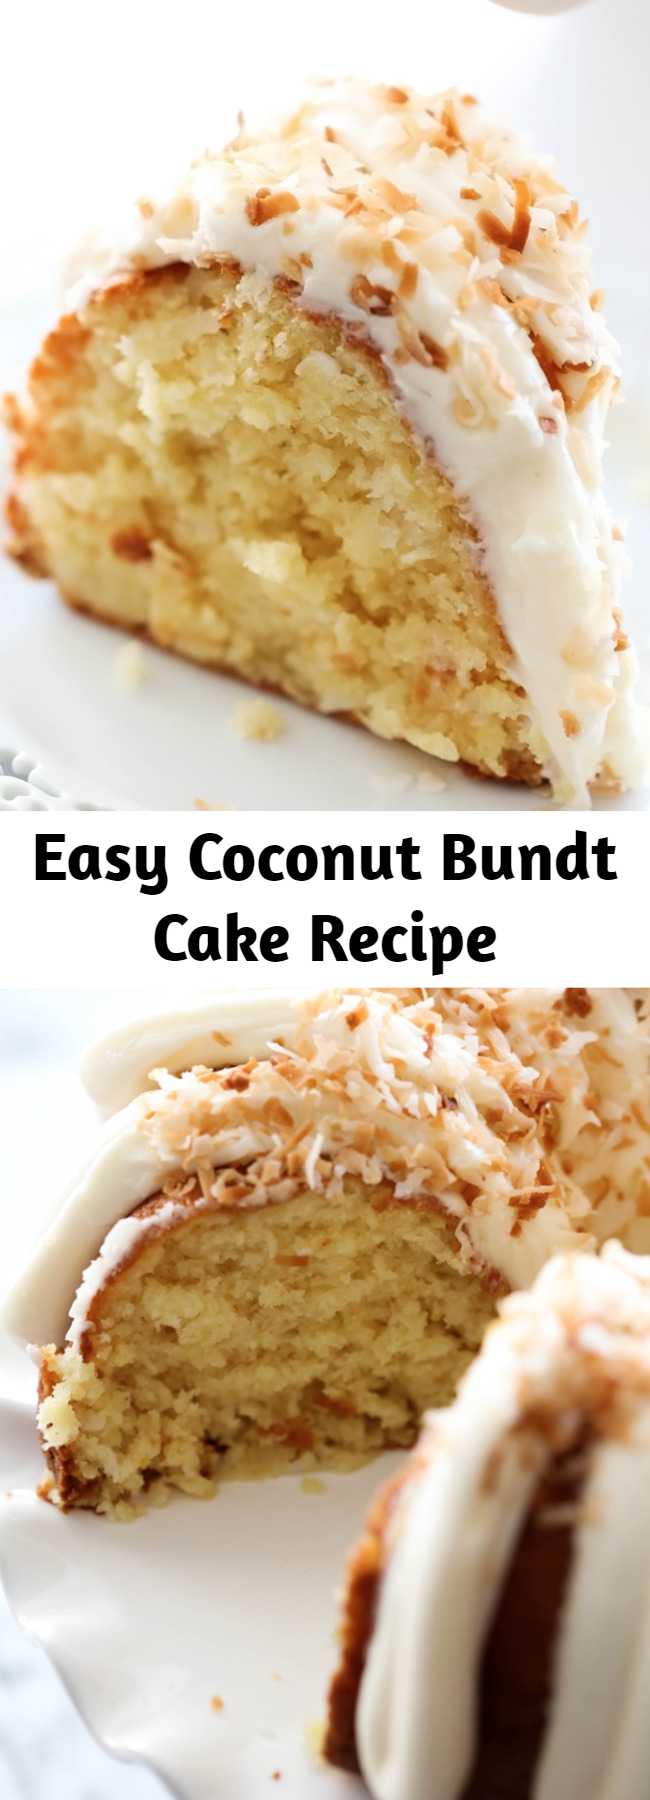 Easy Coconut Bundt Cake Recipe - This is an incredibly moist cake loaded with coconut flavor! The Cream Cheese Frosting on top is the perfect pairing. This cake with be loved by all who try it!